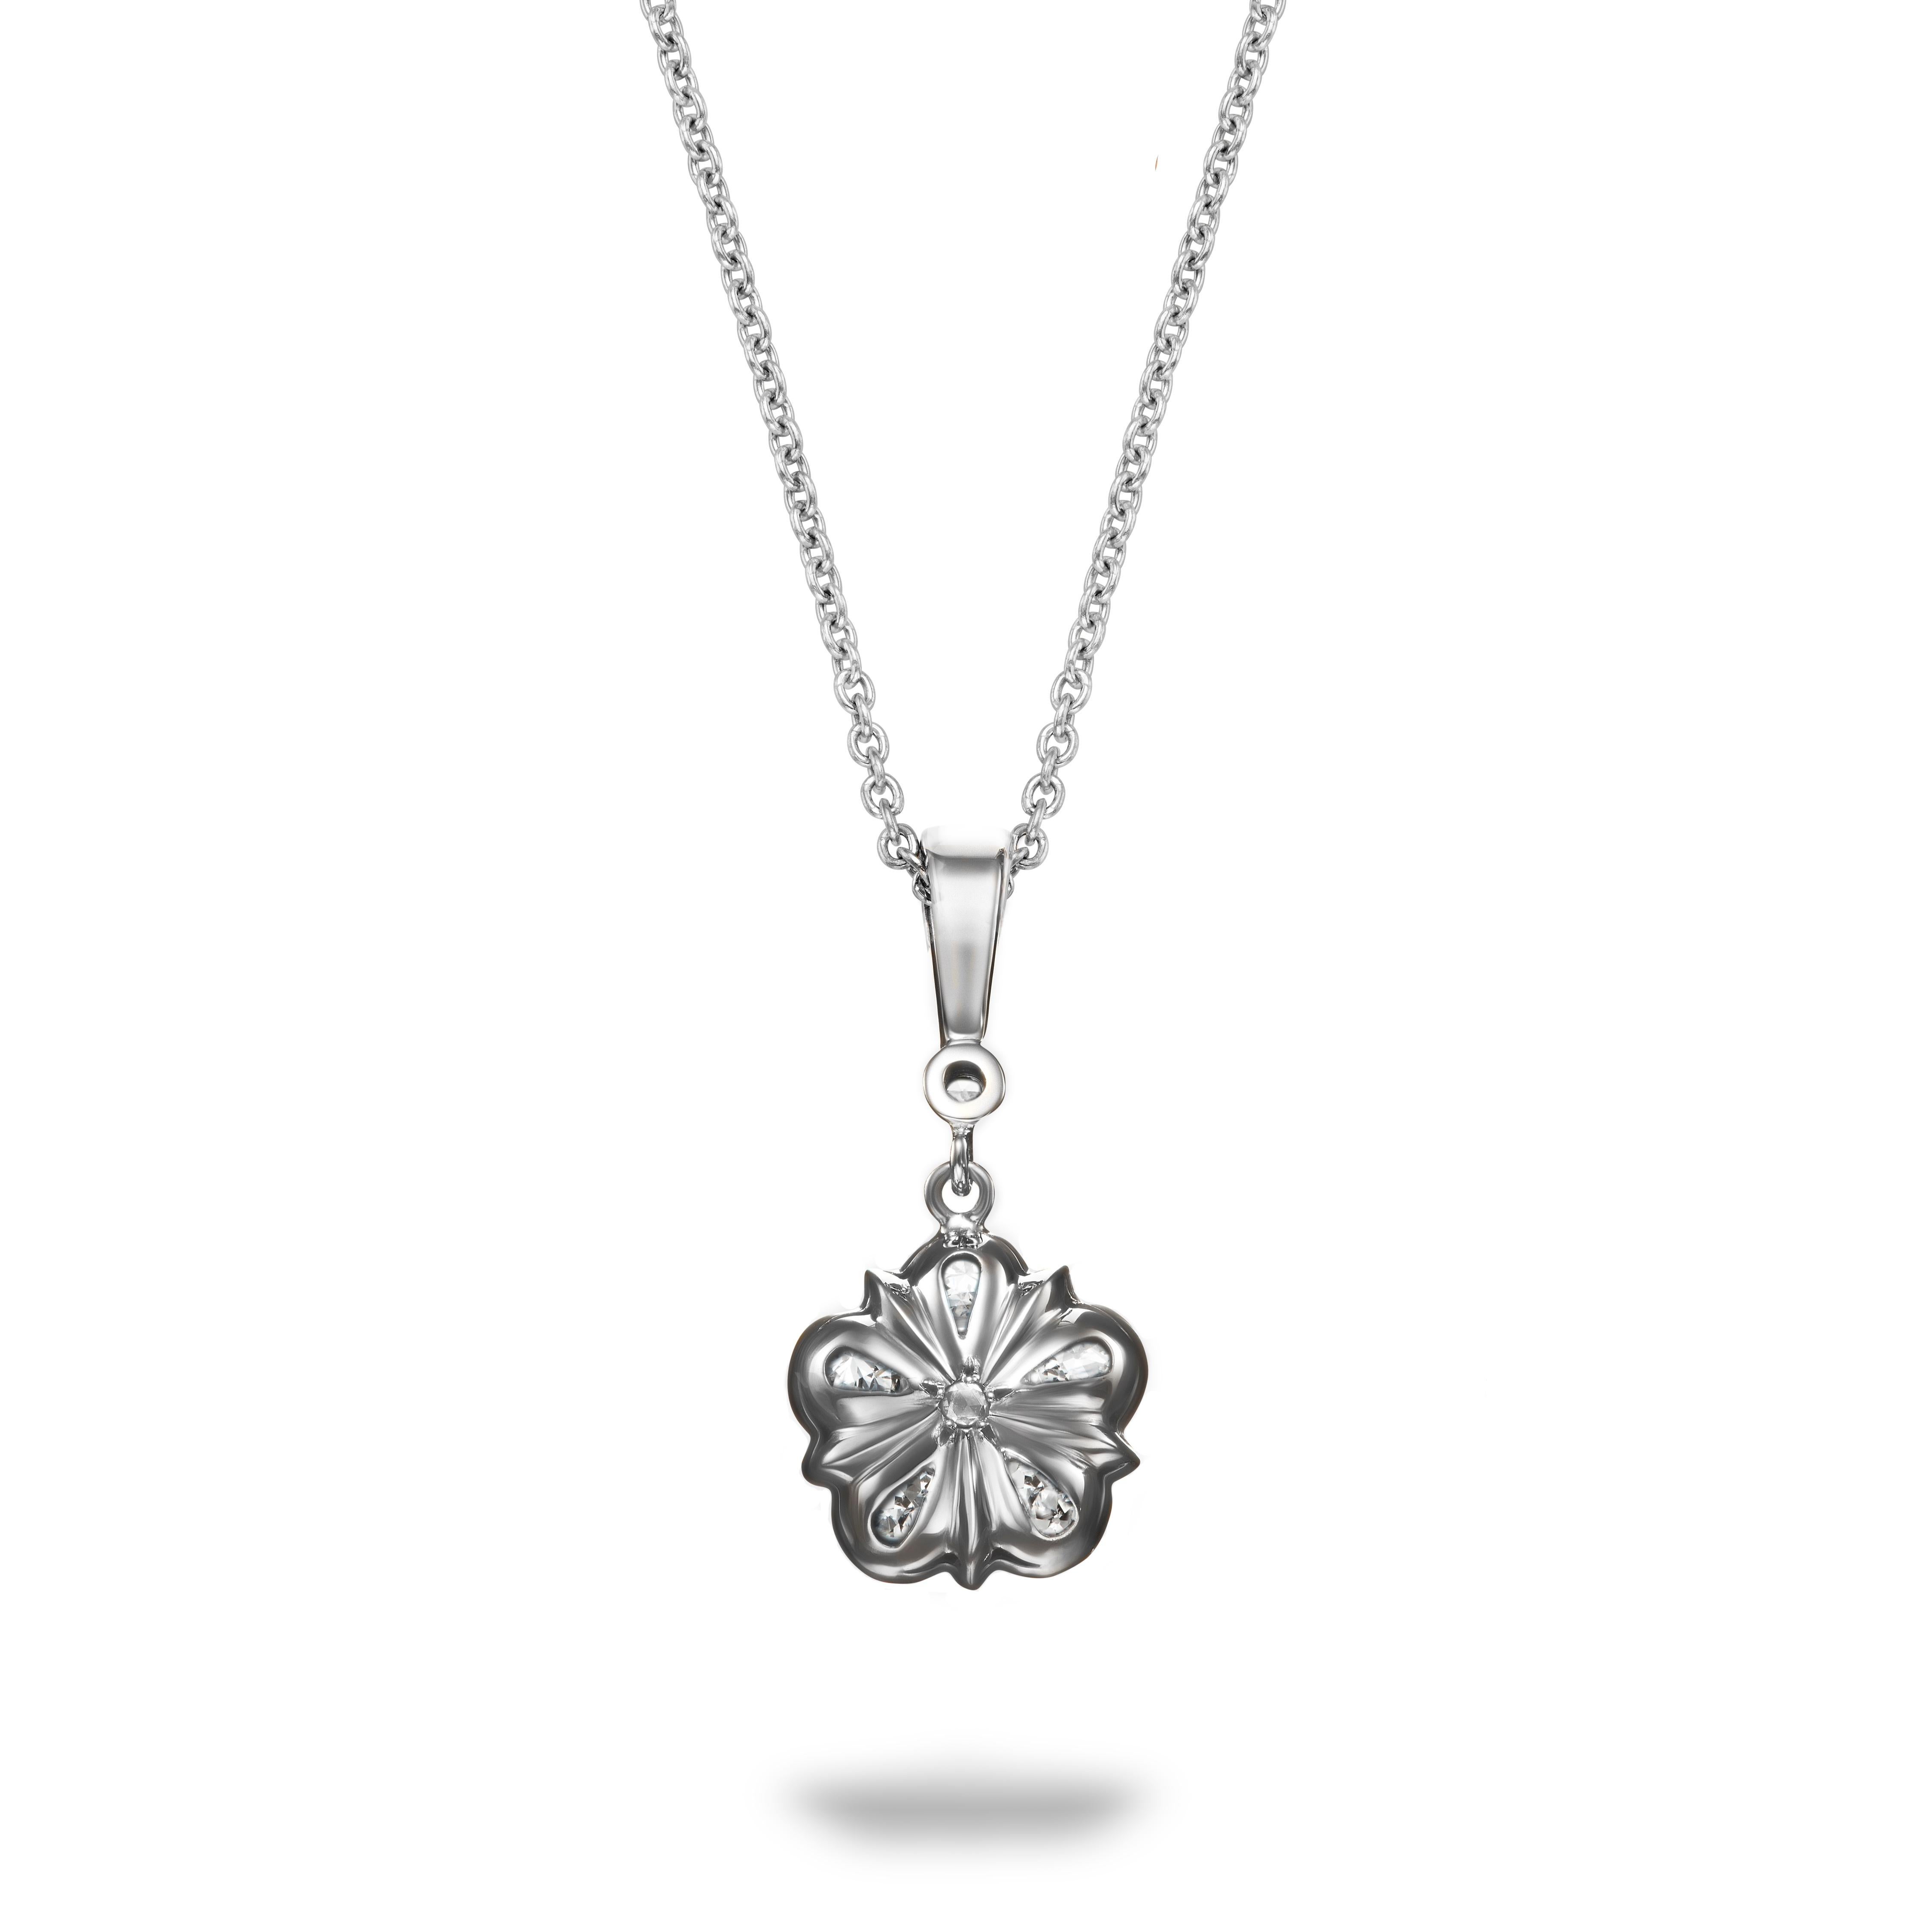 This stunning old cut diamond Rose pendant features sparkling old European cut diamonds set in bright platinum. The pendant is suspended from a platinum bail with another lovely matching old cut diamond. In true Aril Jewels style, the back of the